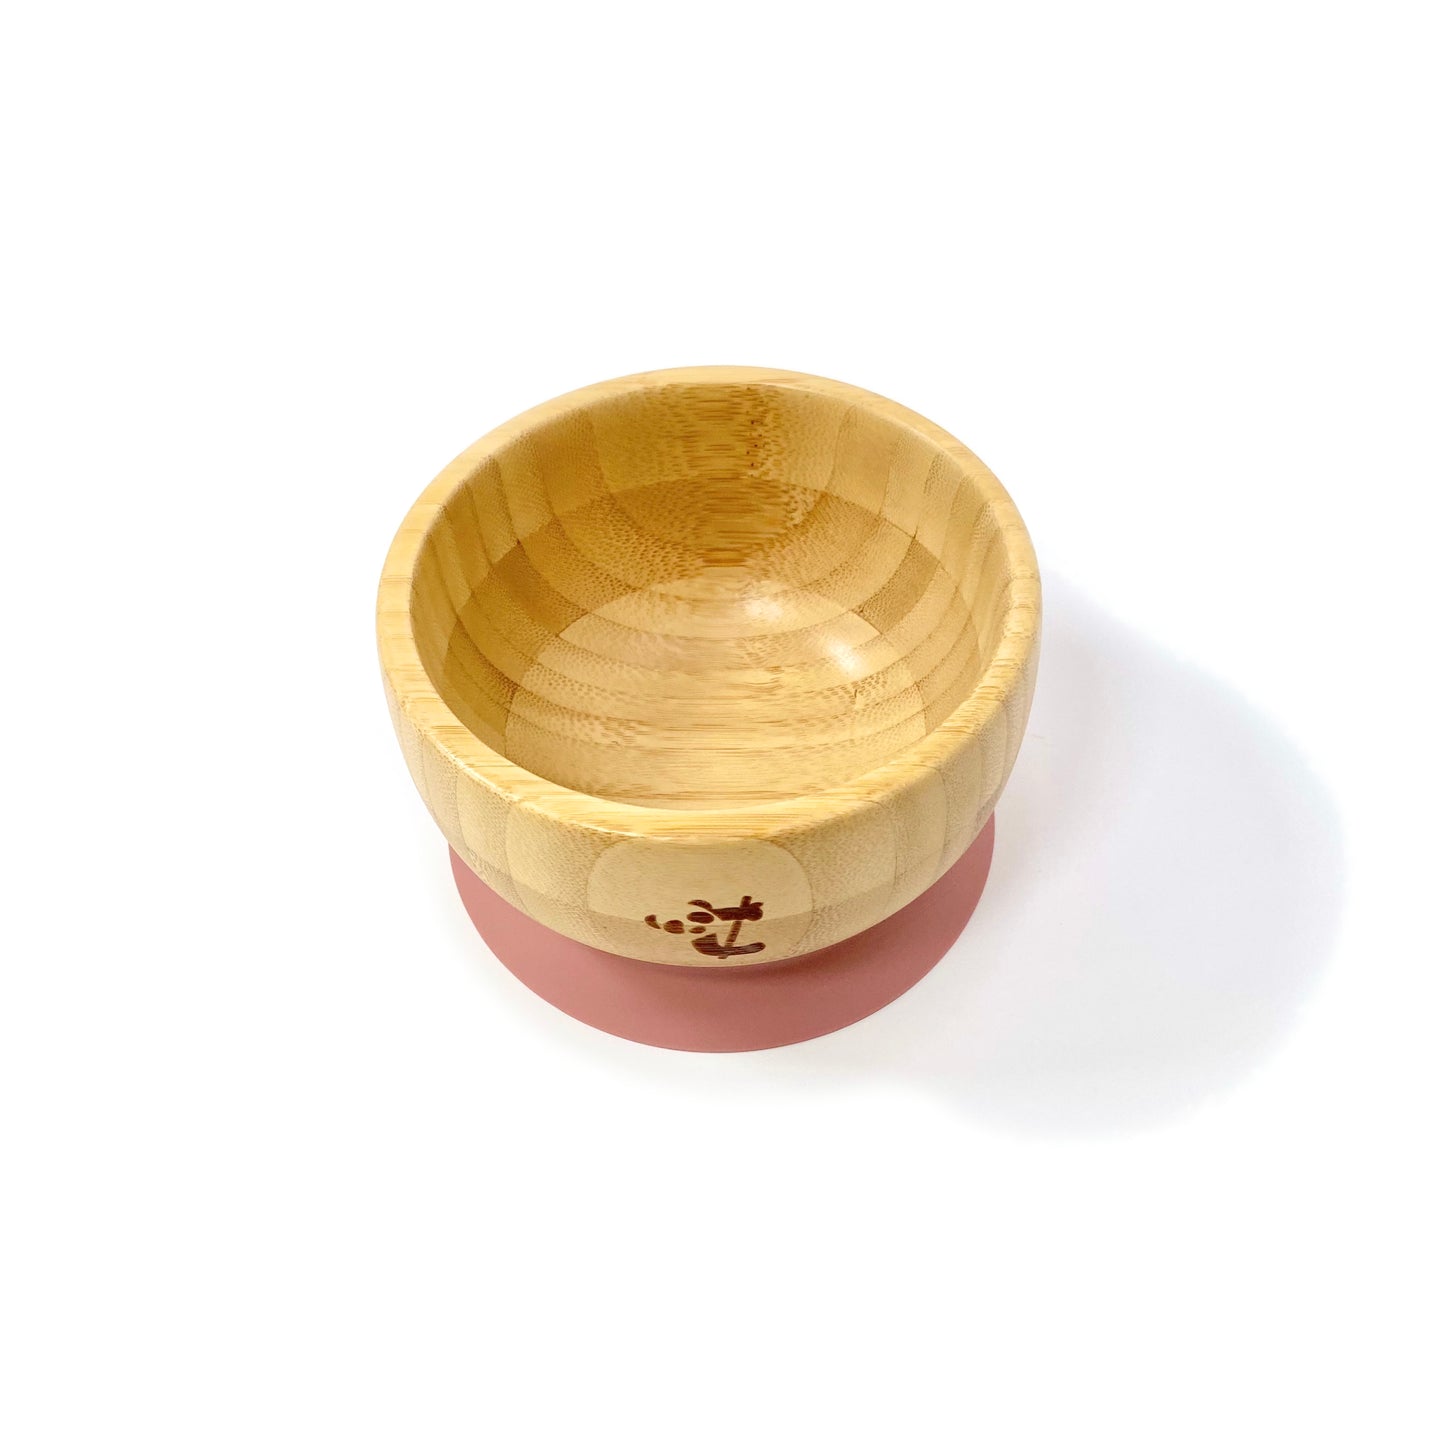 A children’s bamboo bowl with a pink blush silicone suction ring.